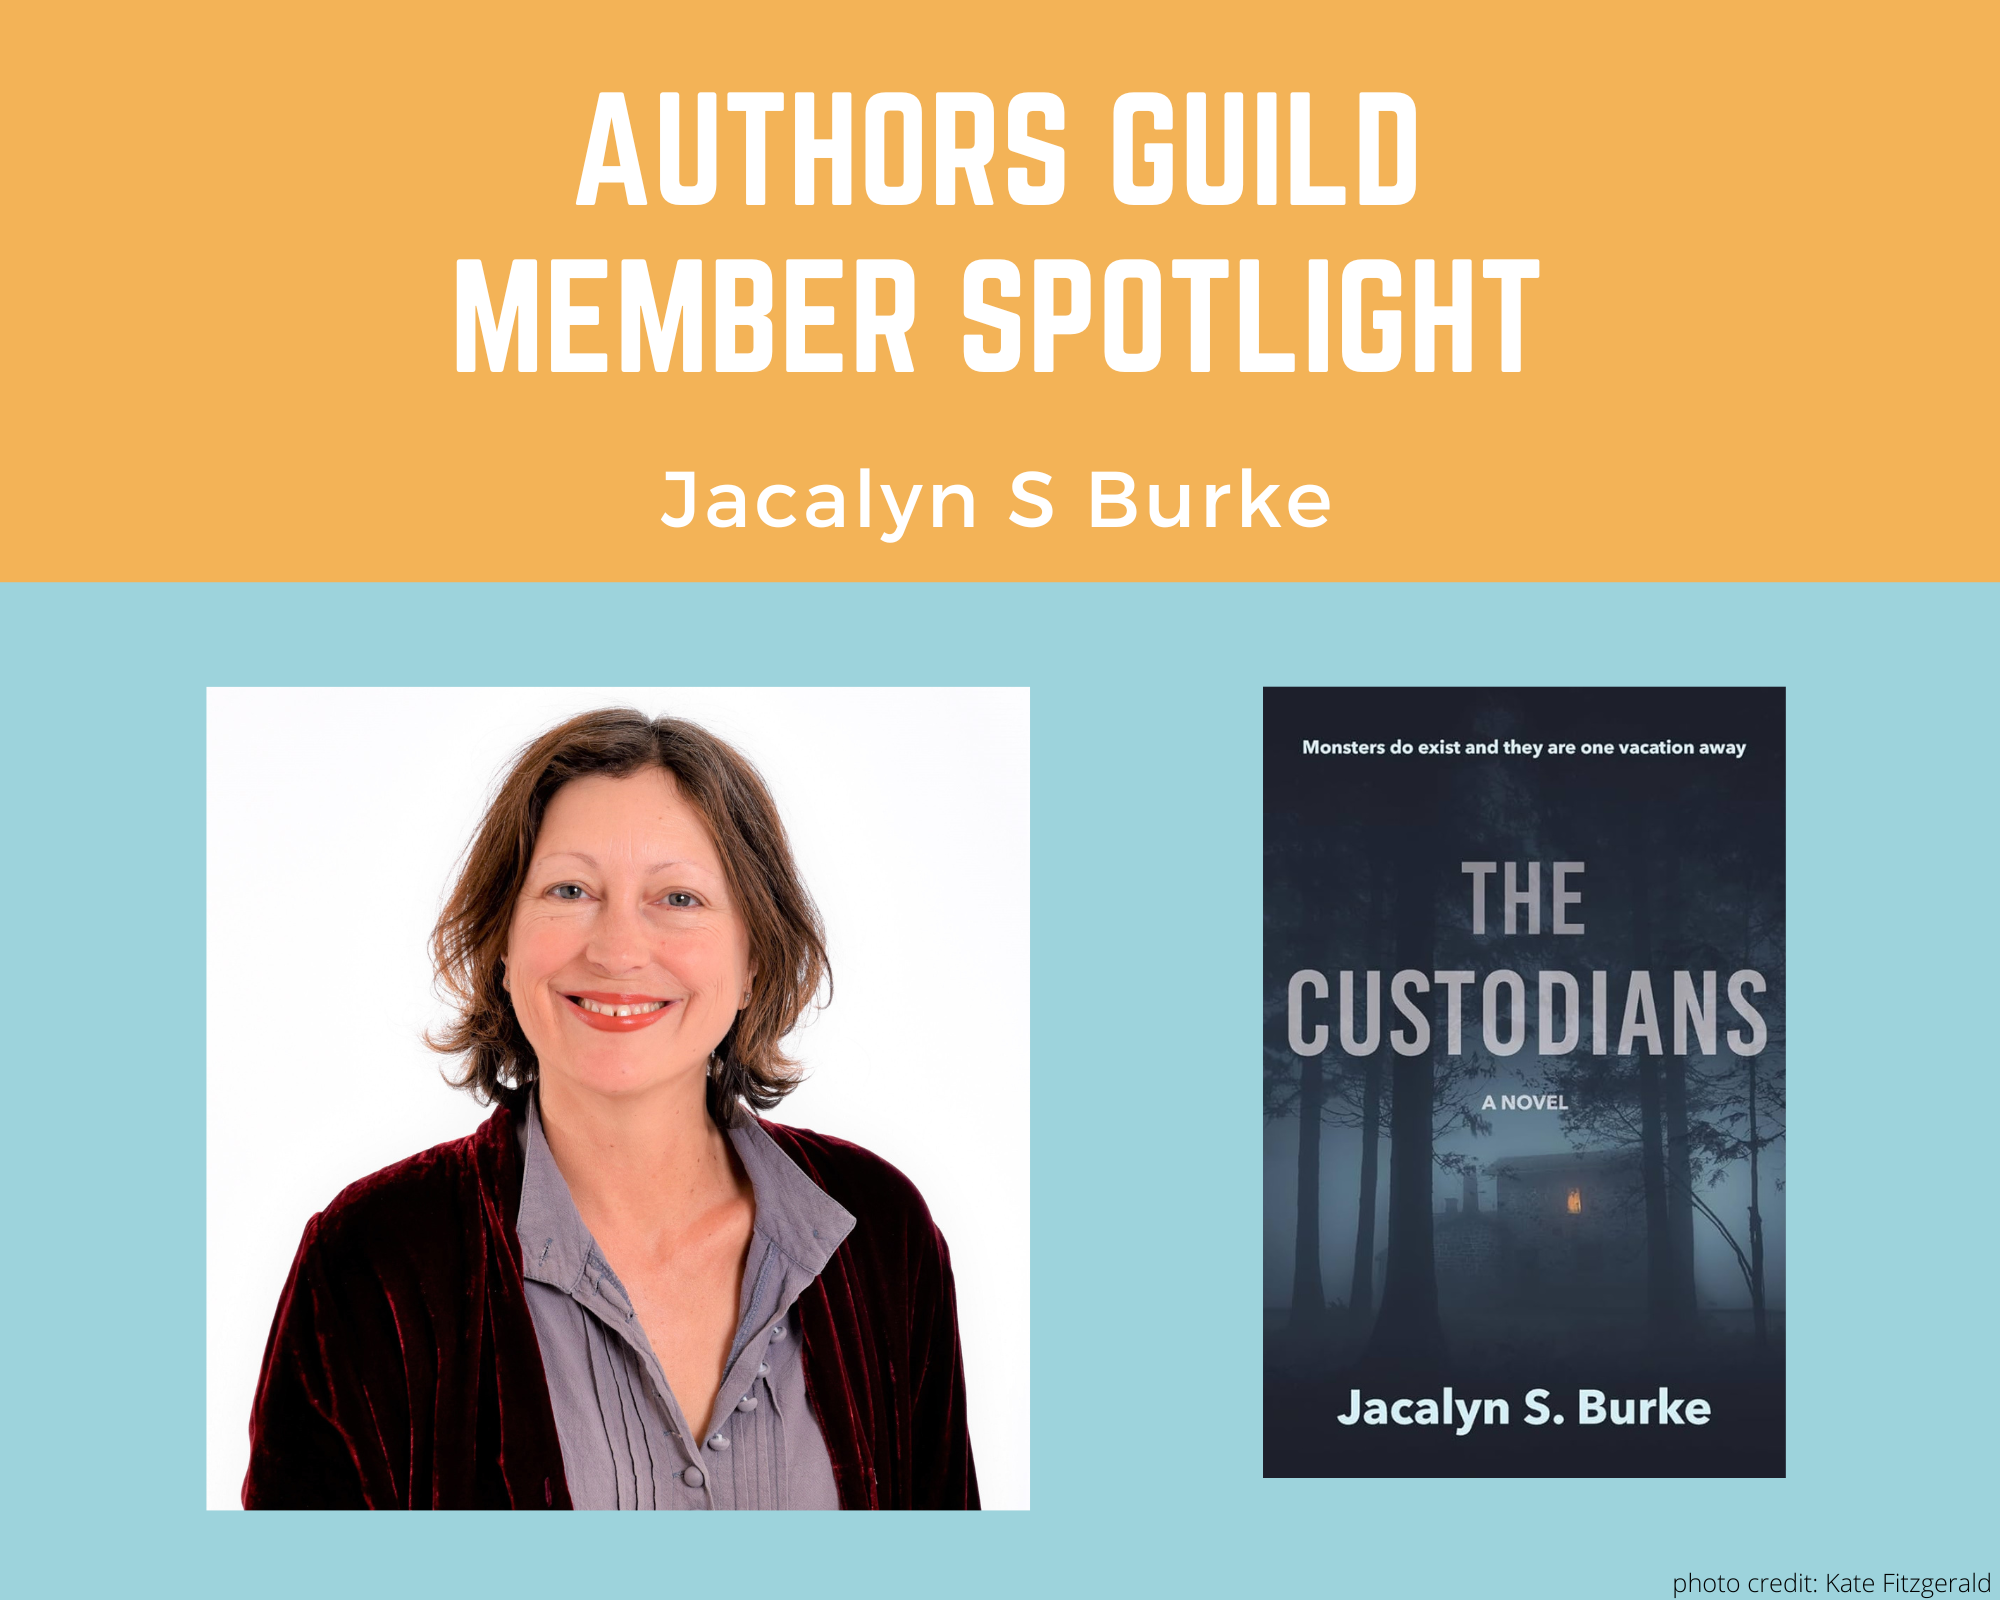 author Jacalyn Burke and an image of her book The Custodians